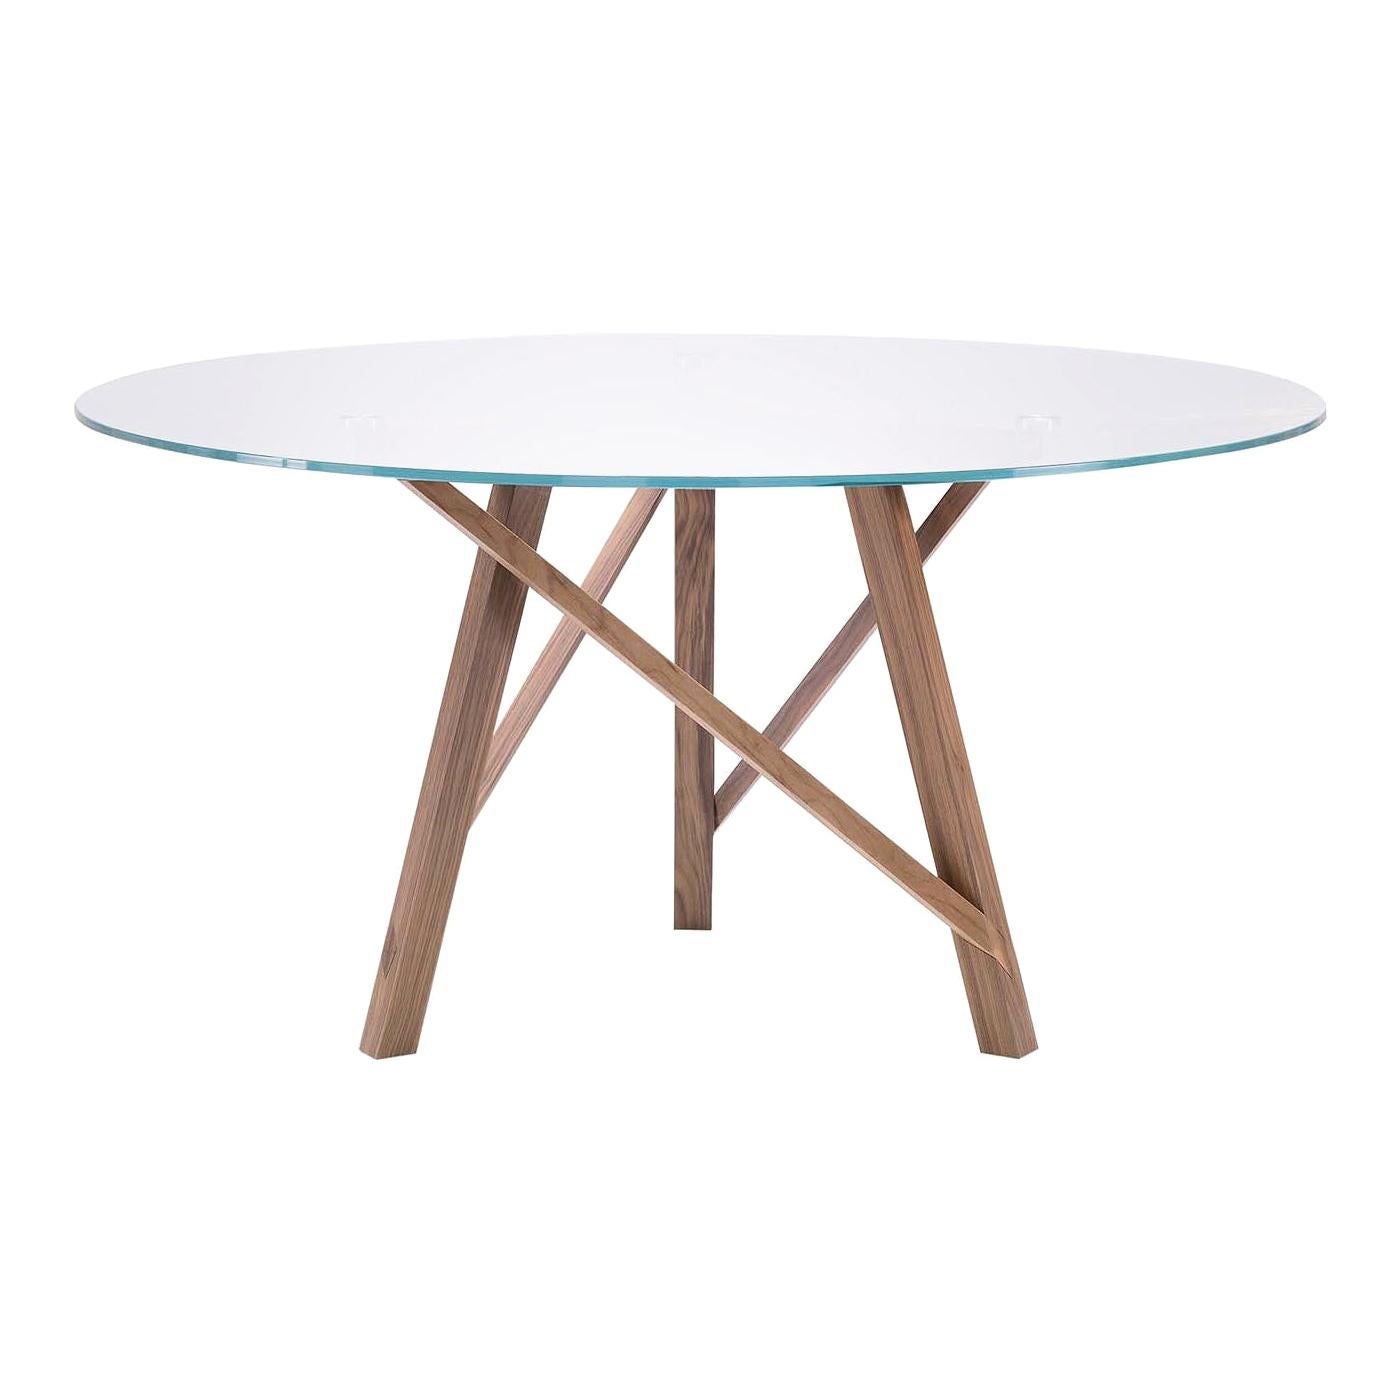 Zeus Round Table by Giuliano and Gabriele Cappelletti by Pacini & Cappellini